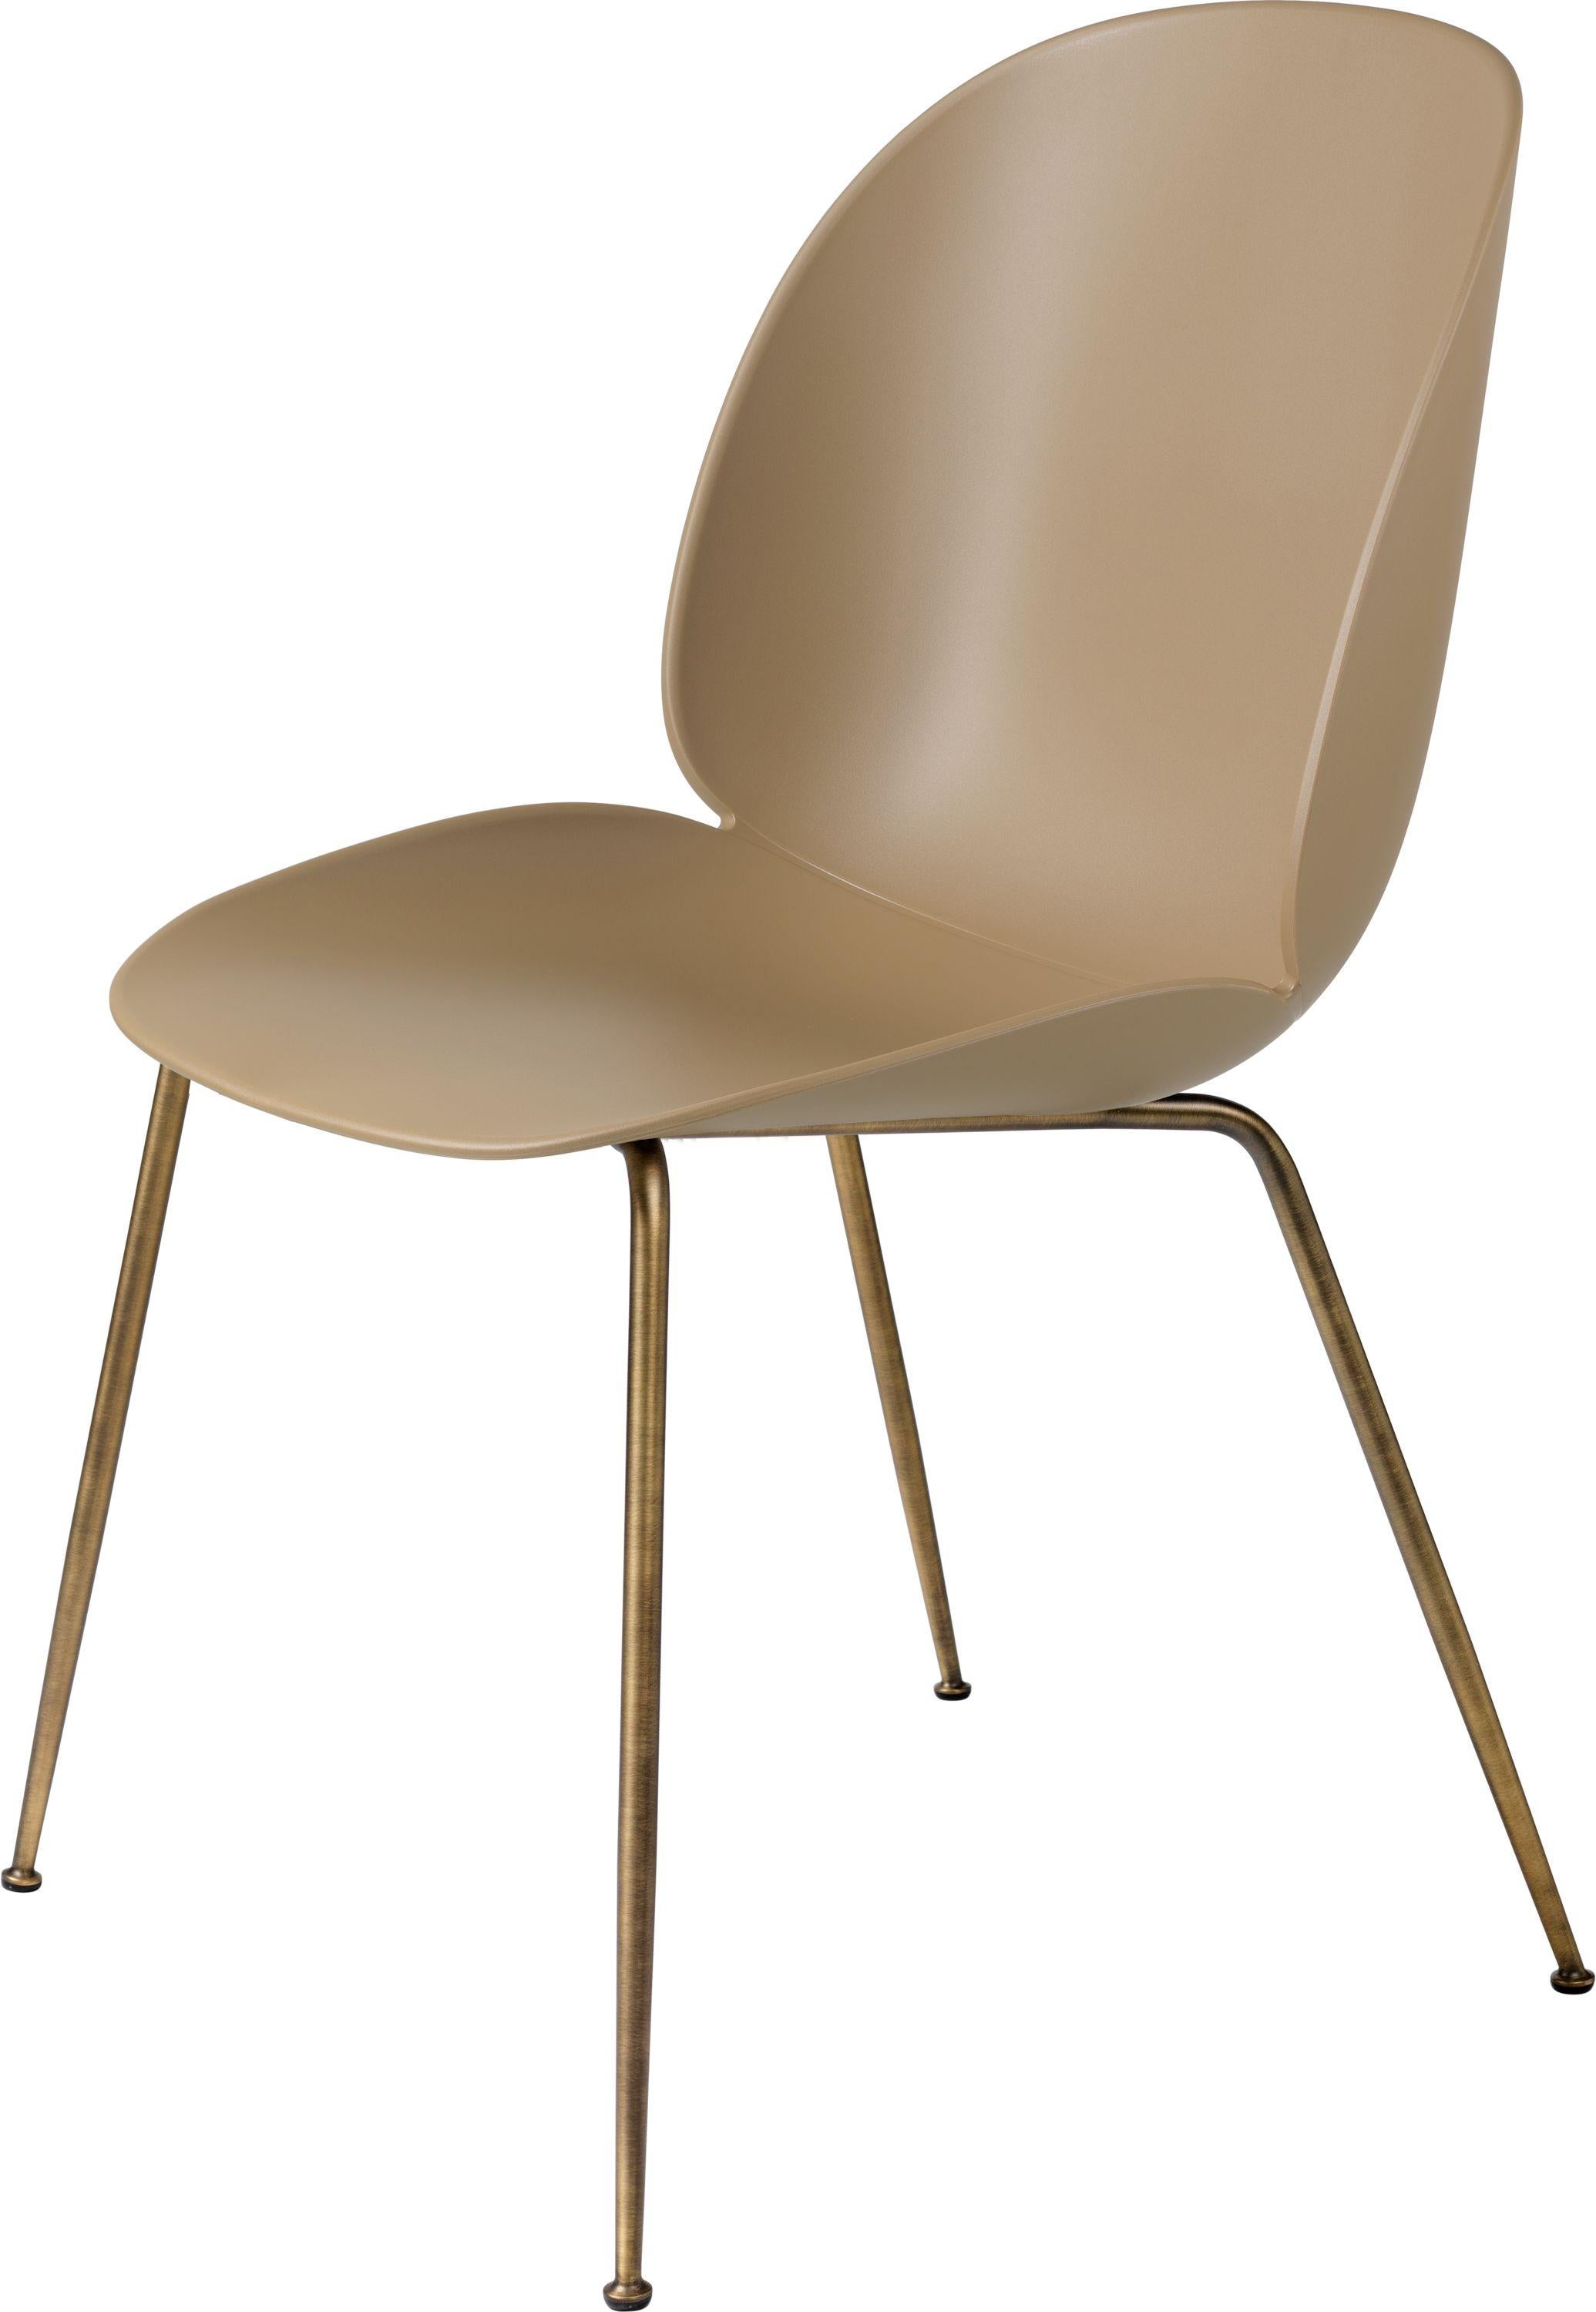 Contemporary GamFratesi 'Beetle' Dining Chair with Antique Brass Conic Base